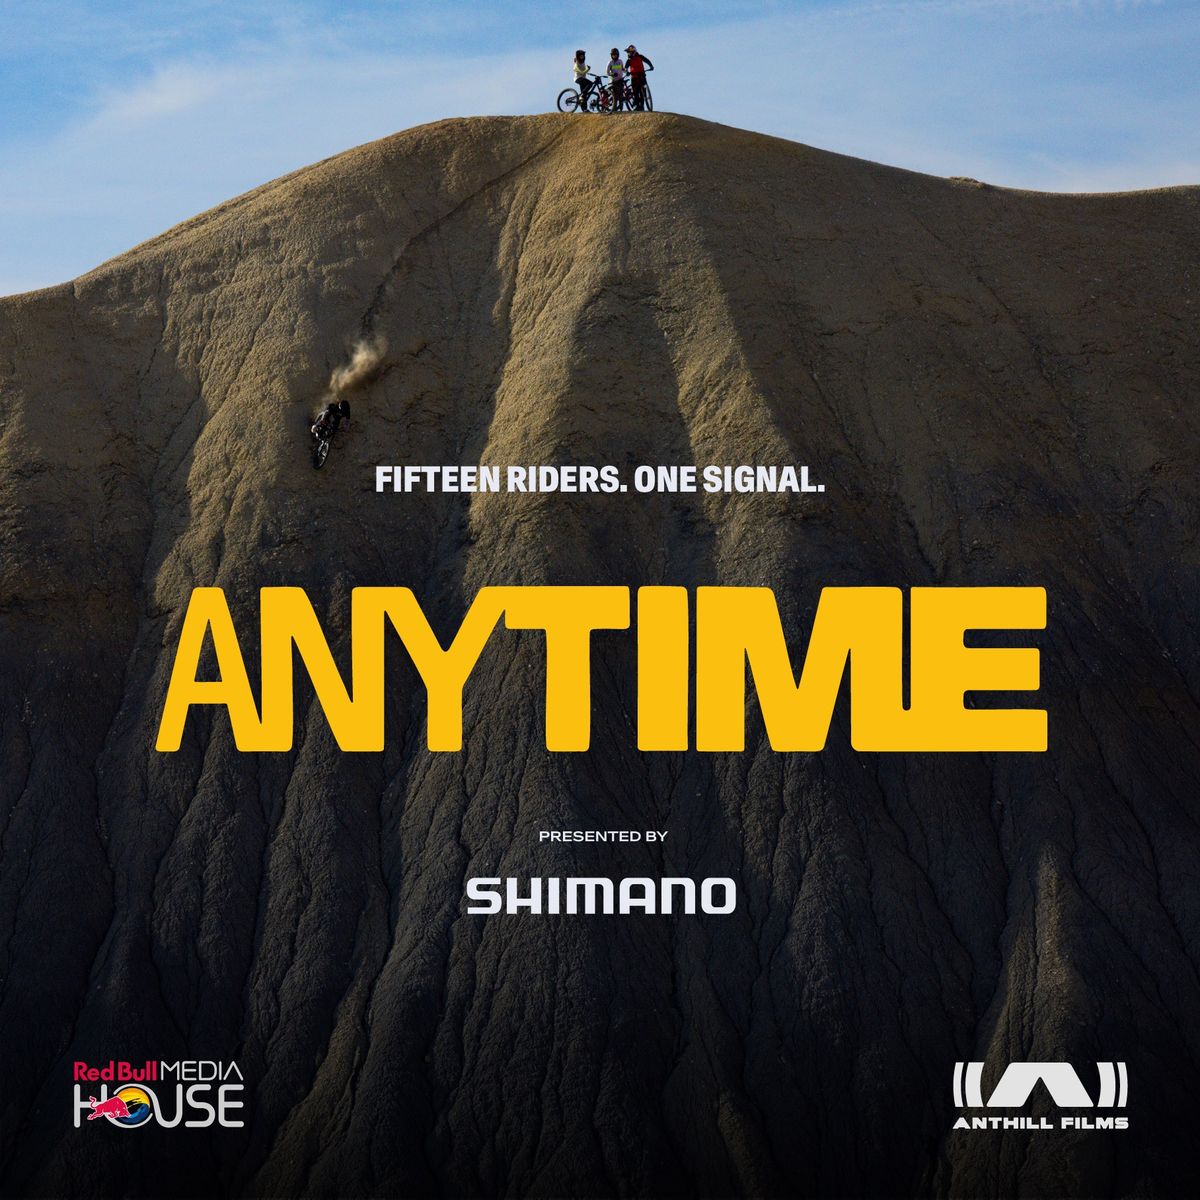 \u201cANYTIME\u201d MOVIE PREMIERE  - Shimano presents a Red Bull Media House and Anthill Films